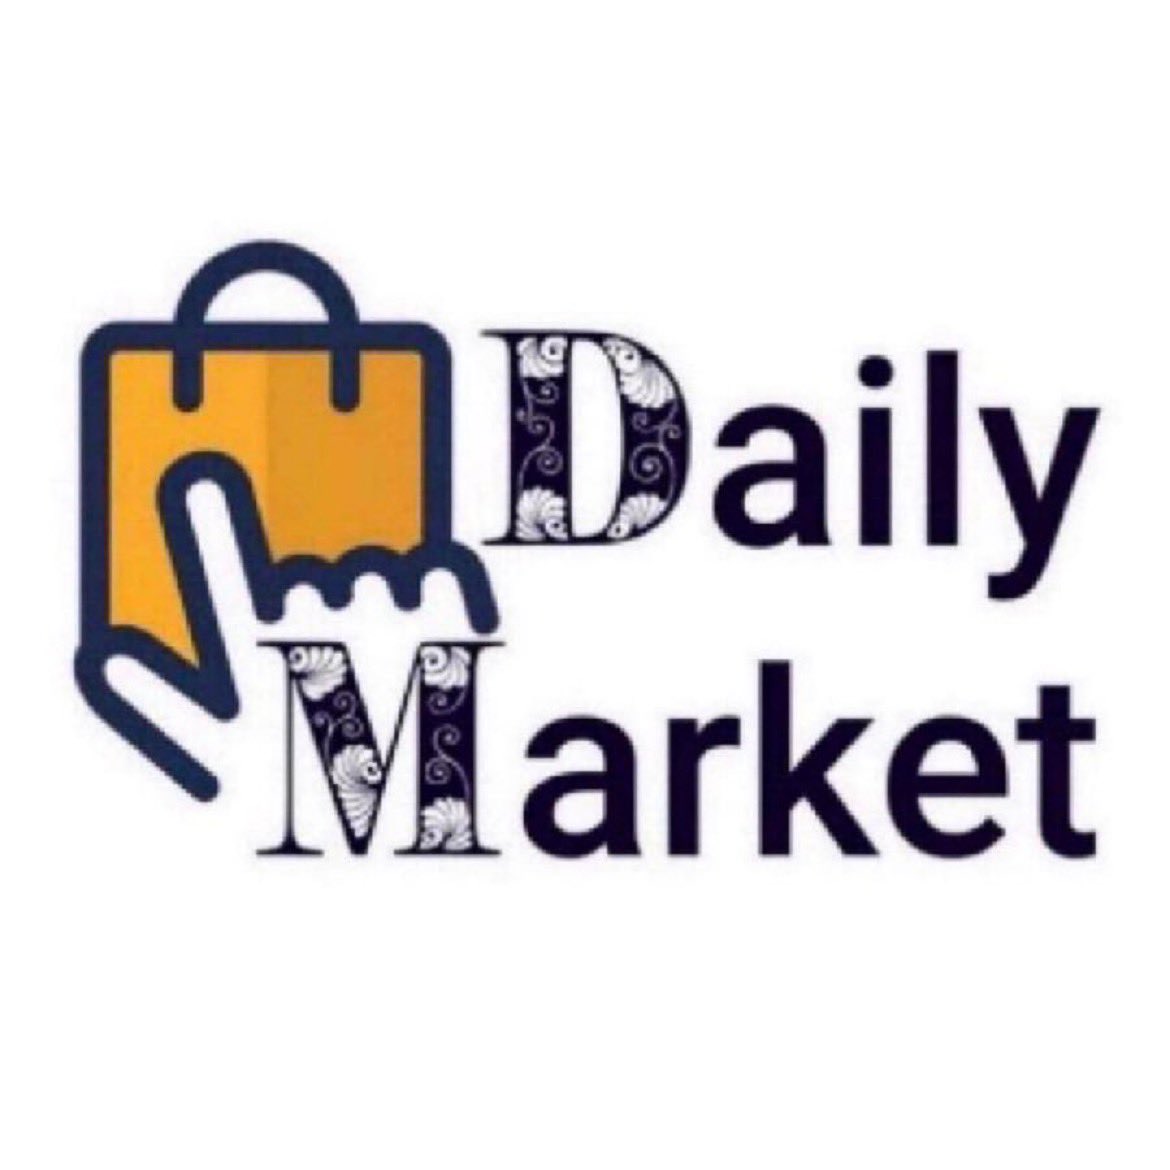 The Daily Market is now open. This is an initiative to help small businesses get visibility using my social media platforms. Advertise the goods and services that you are selling here for free. People usually respond to adverts with phone numbers and product/services prices.…